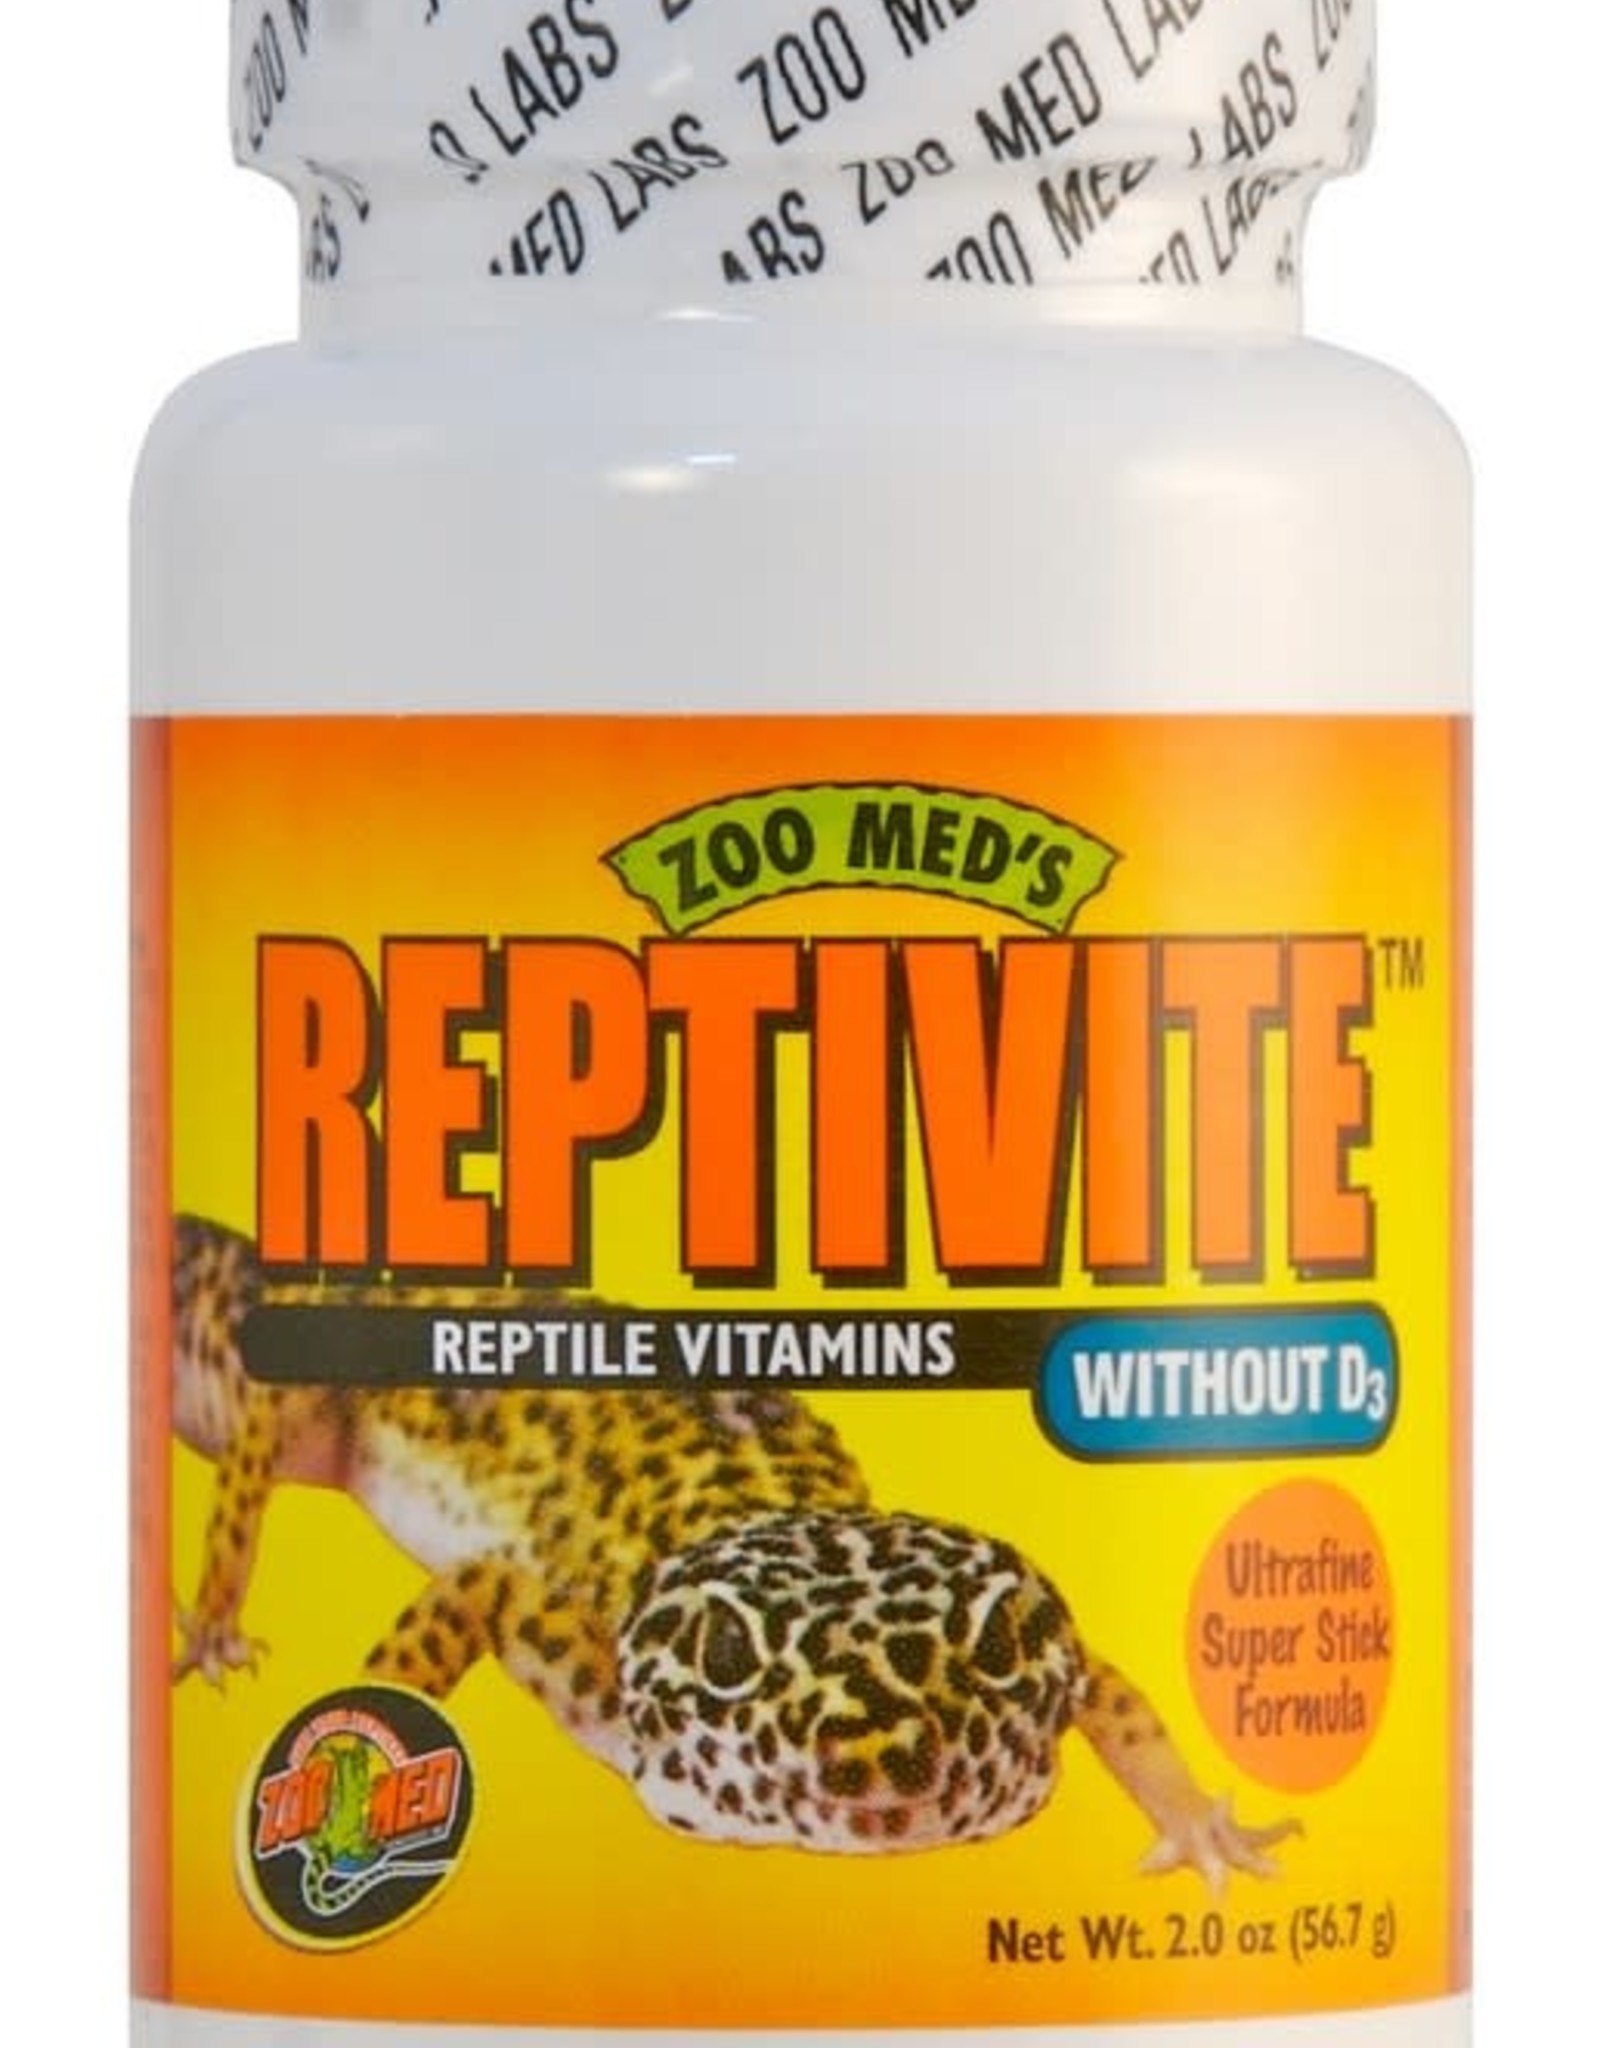 ZOO MED LABORATORIES, INC. ZOO MED- A35-2- REPTIVITE- WITHOUT D3- 1.5X1.5X4- 2 OZ